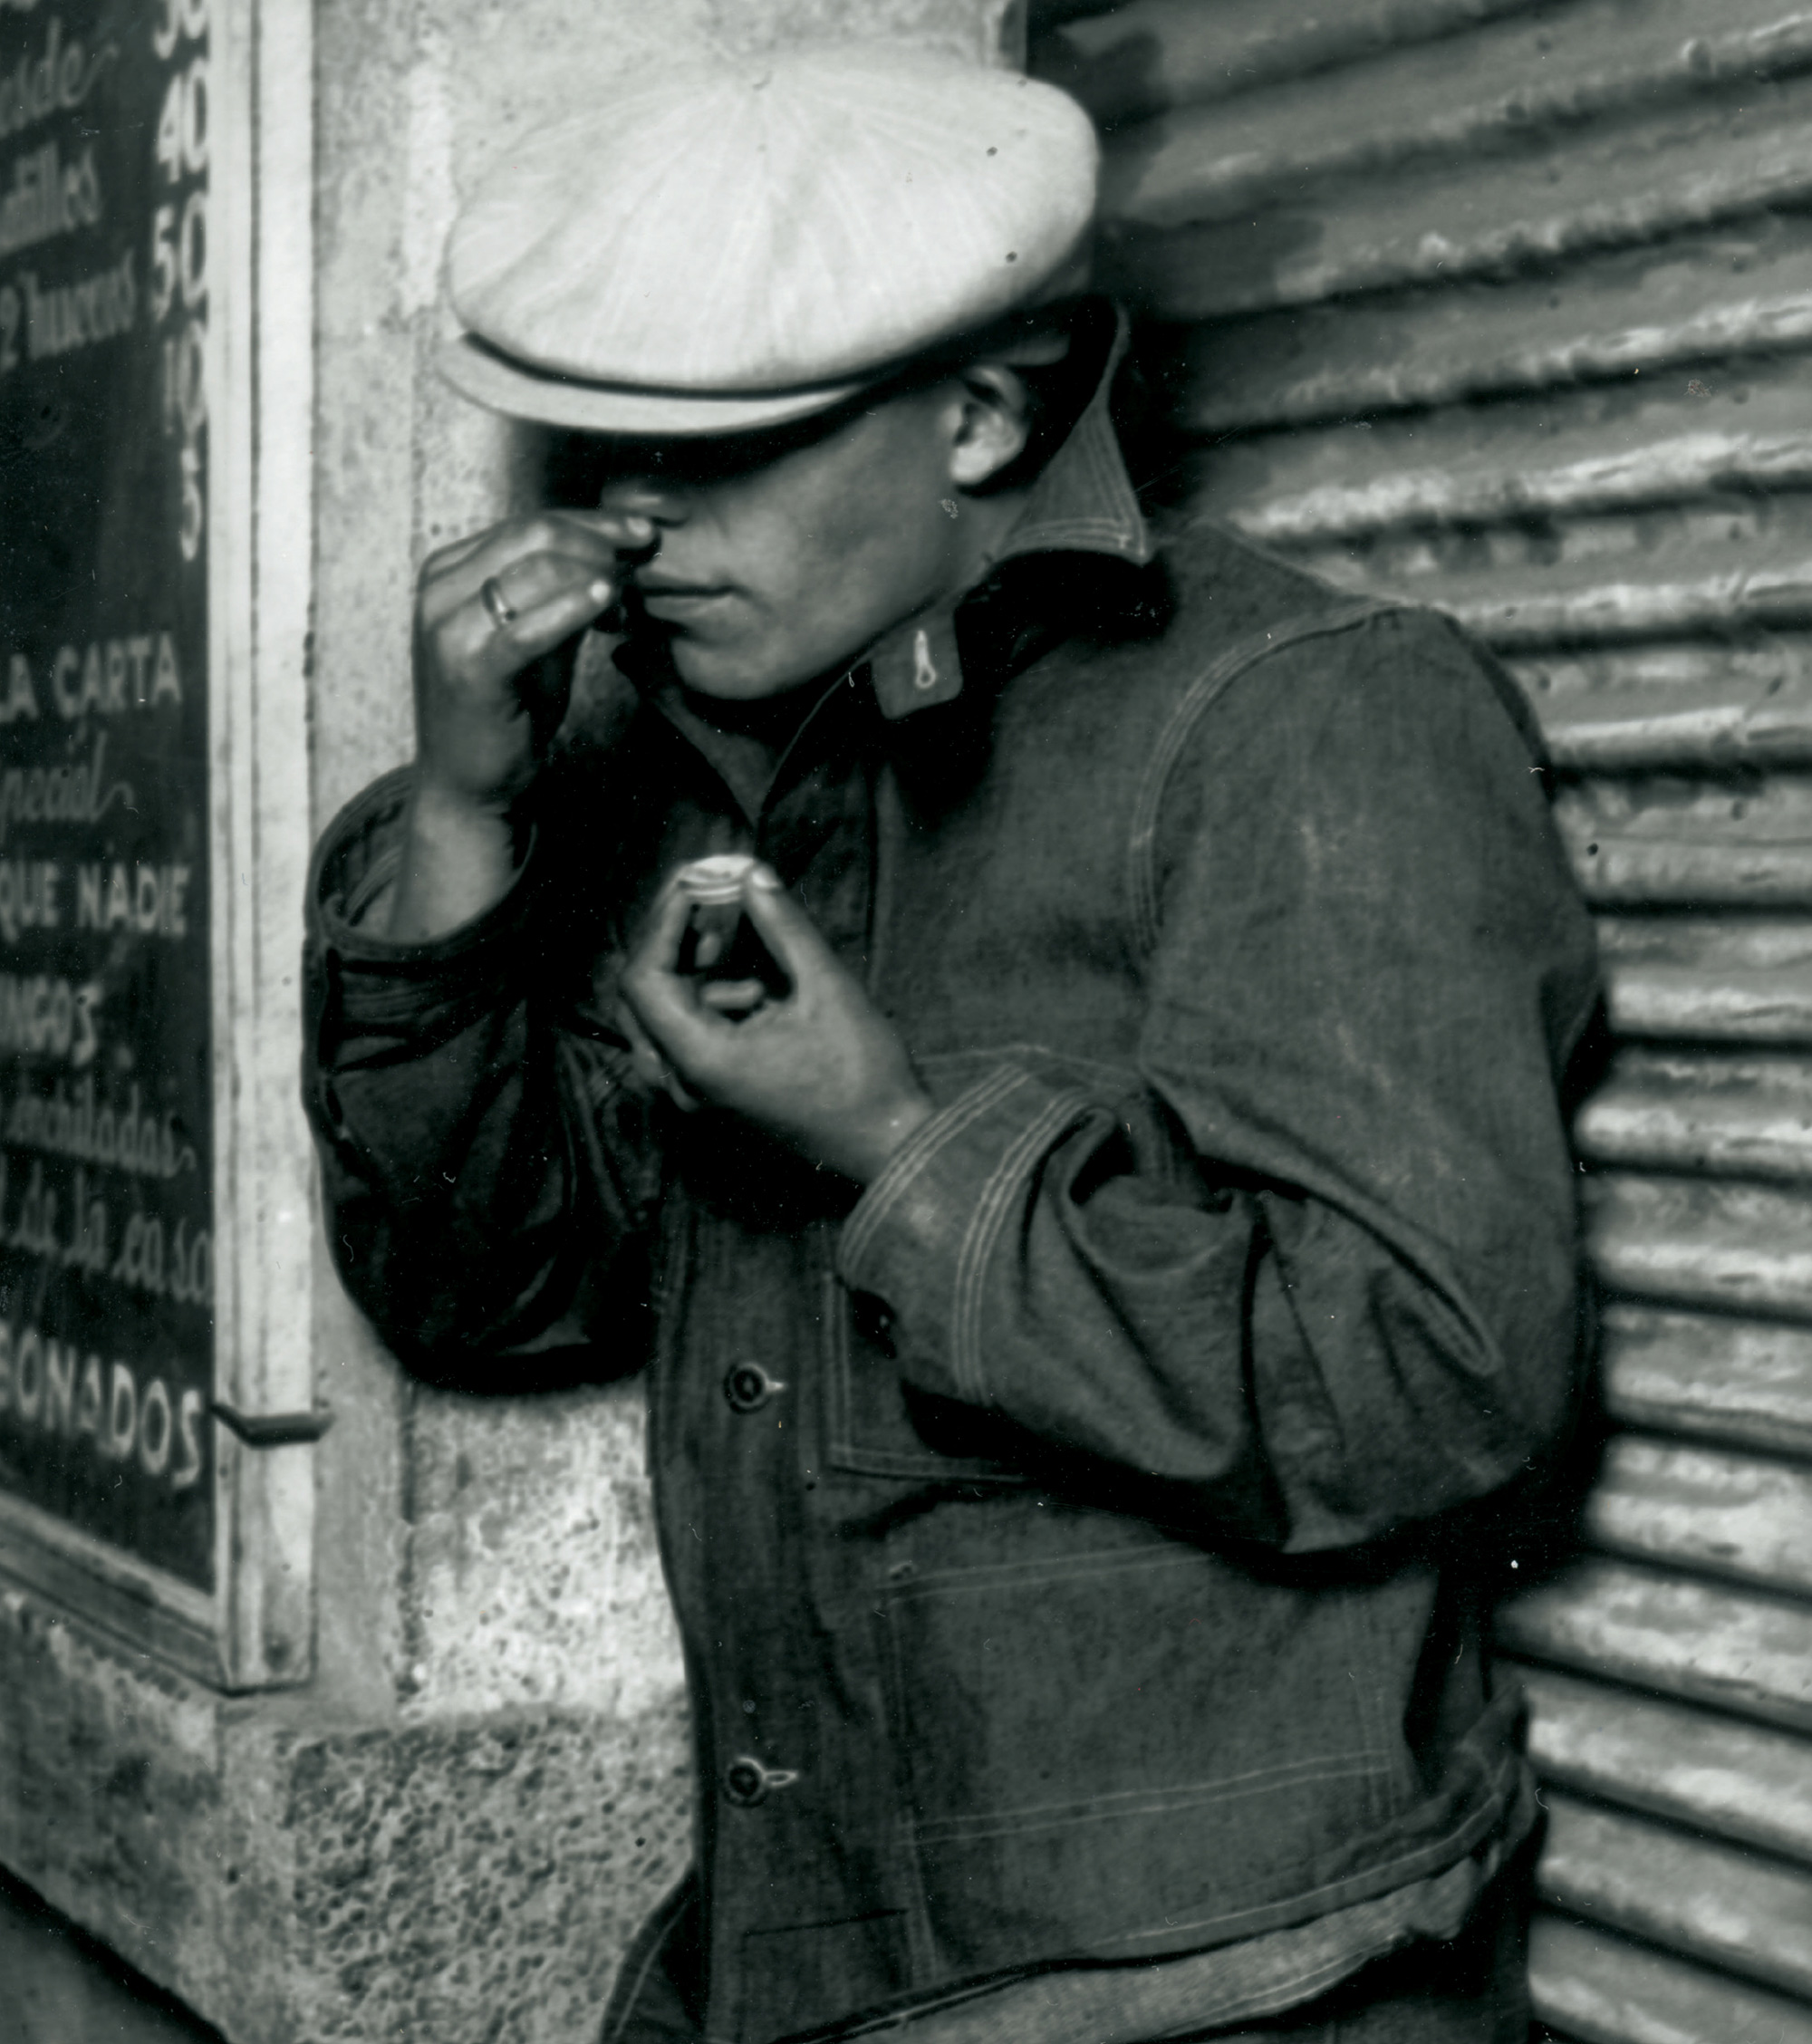 A photograph from the 1920s or 1930s depicting a man snorting a drug.